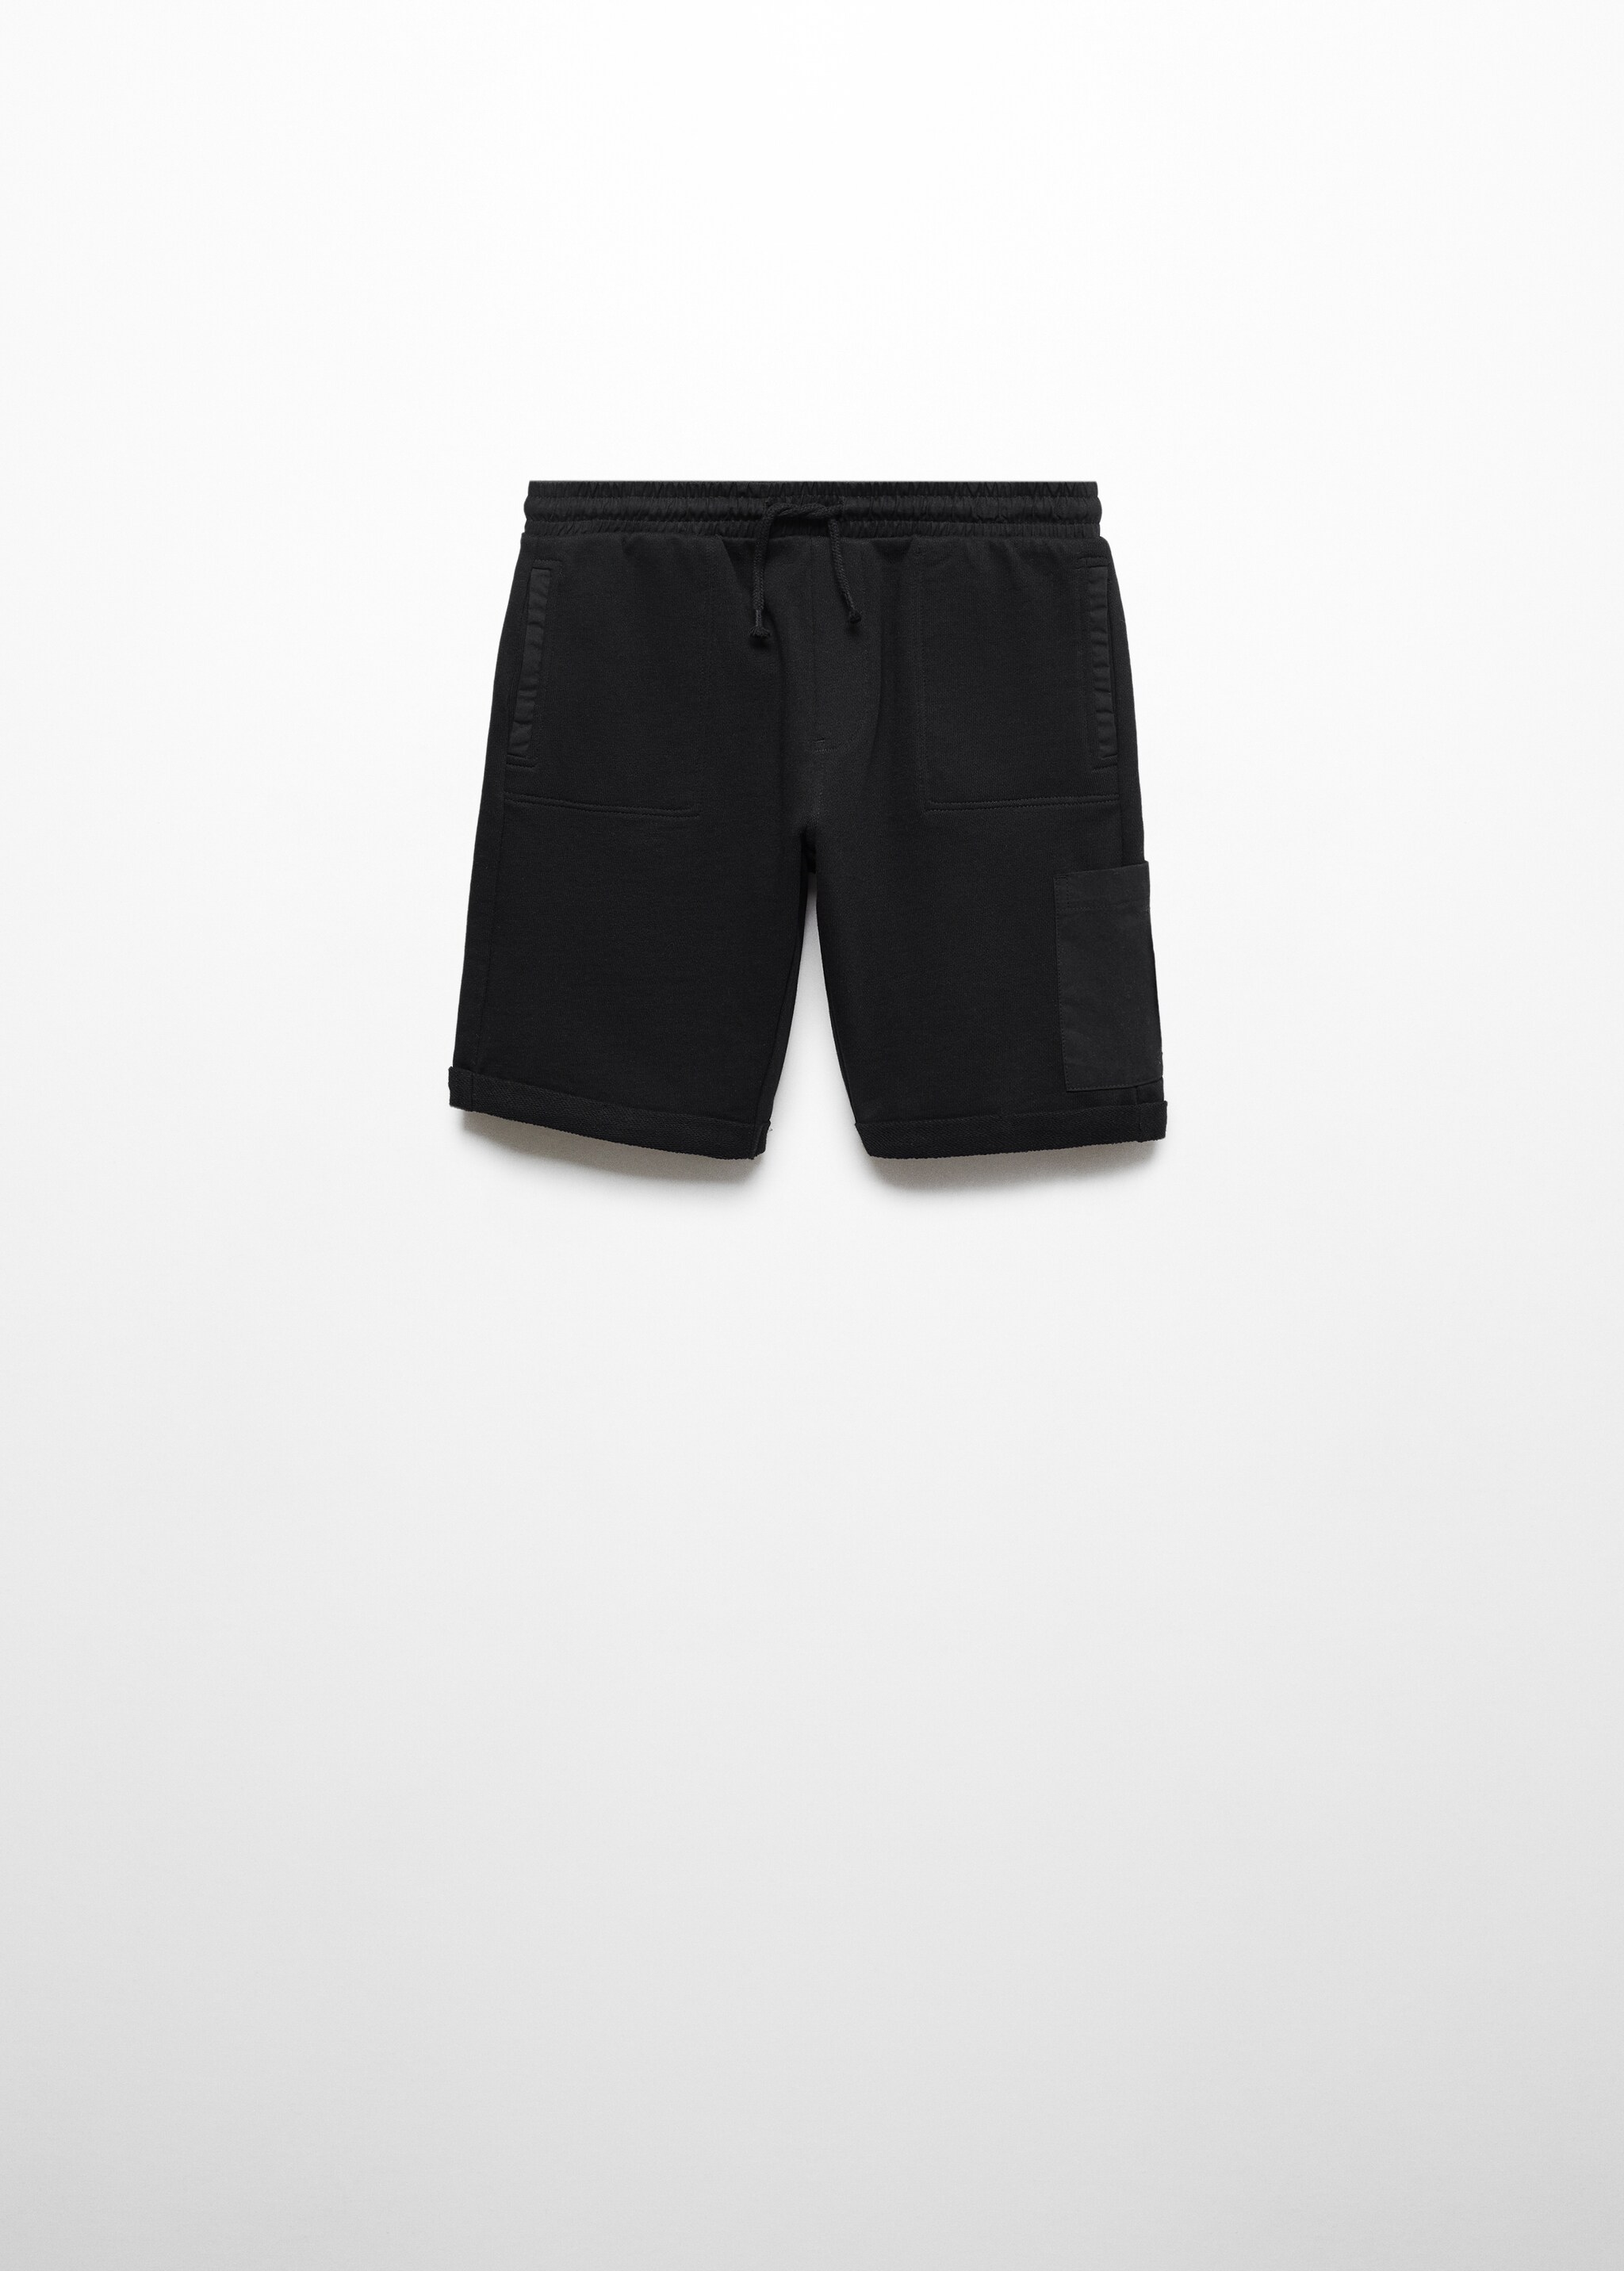 Cotton shorts with elastic waist - Article without model